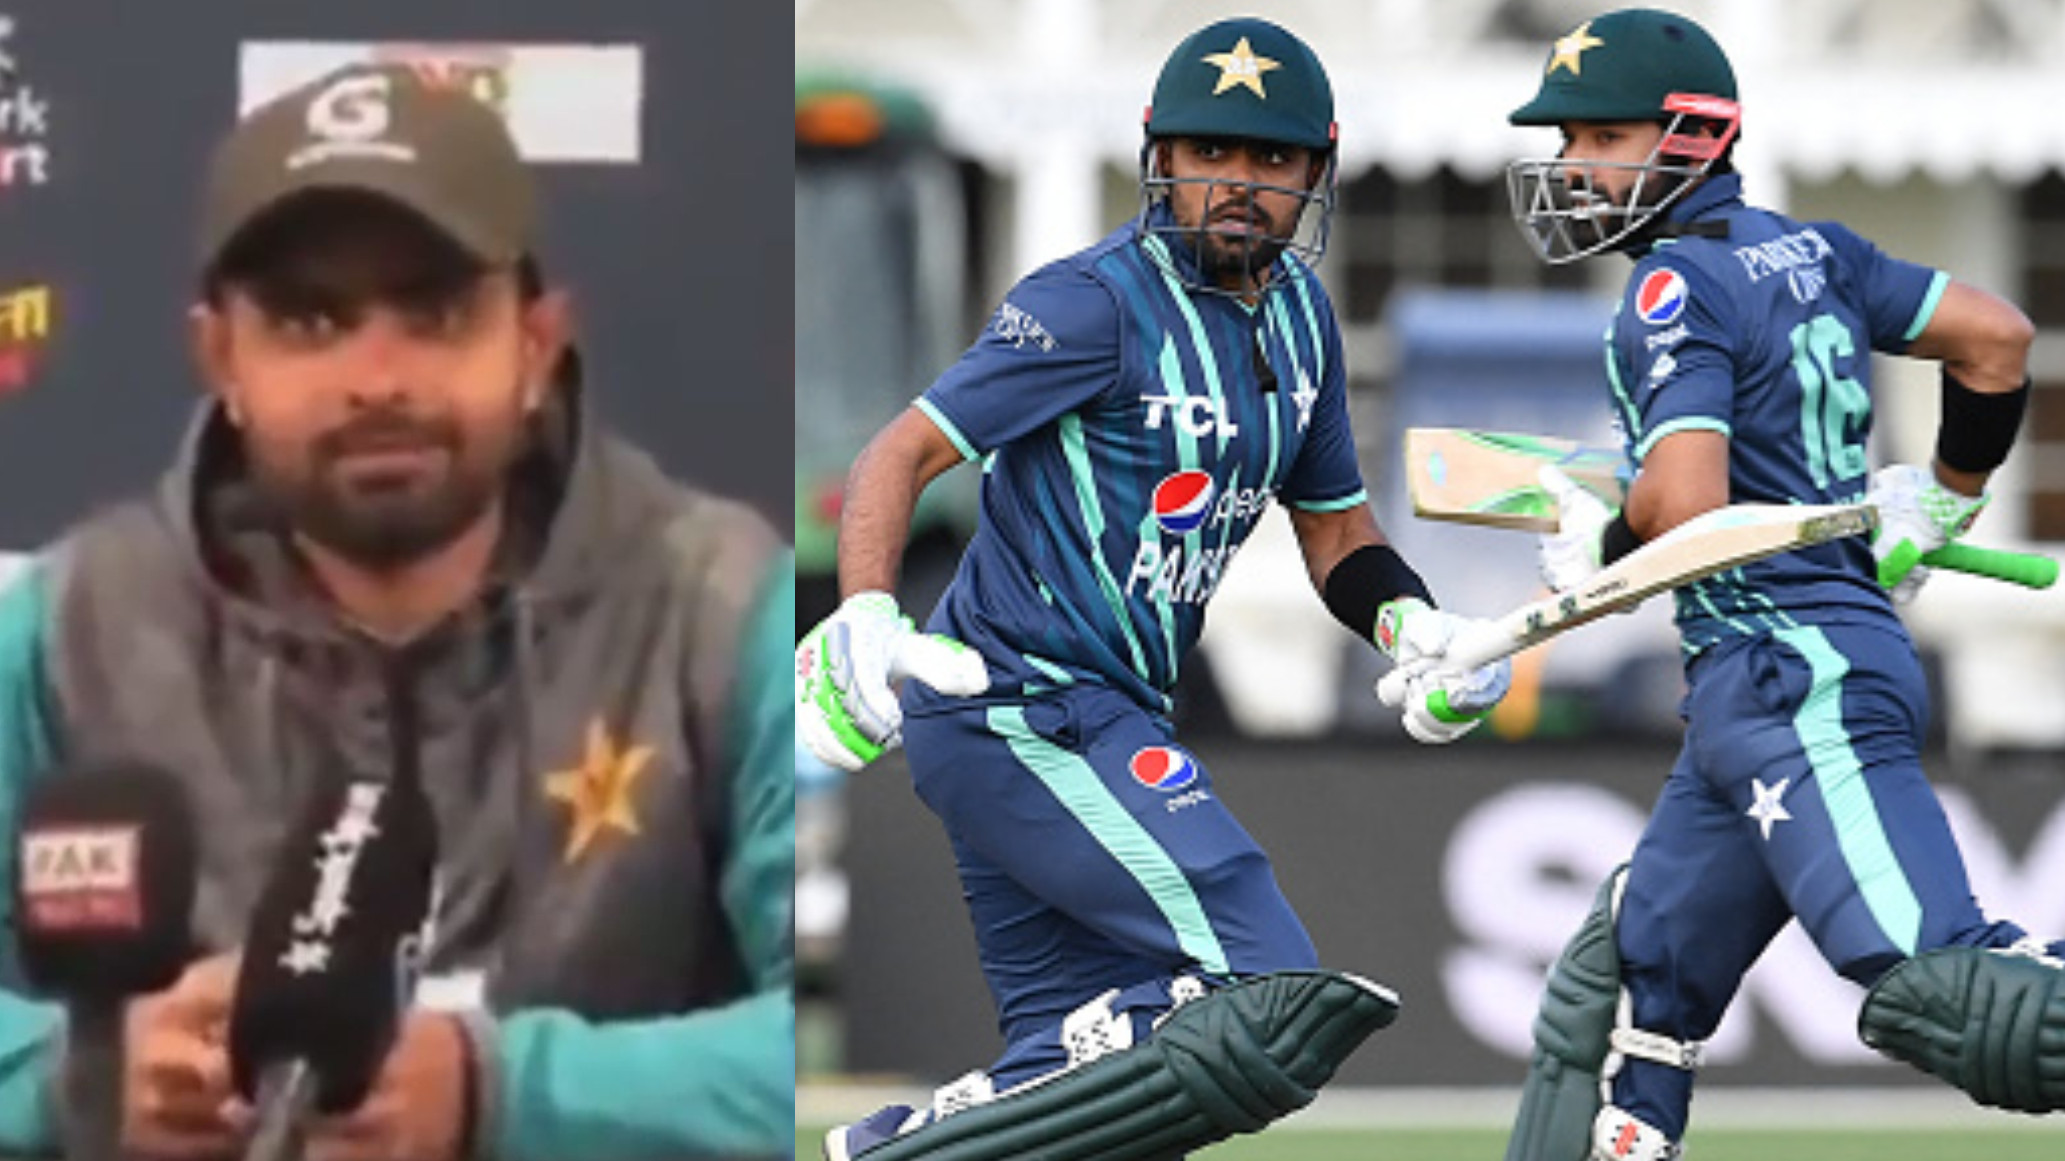 WATCH- “I don't know aap kiski baat kar rahe hai”- Babar Azam’s curt reply to question on criticism from a journalist